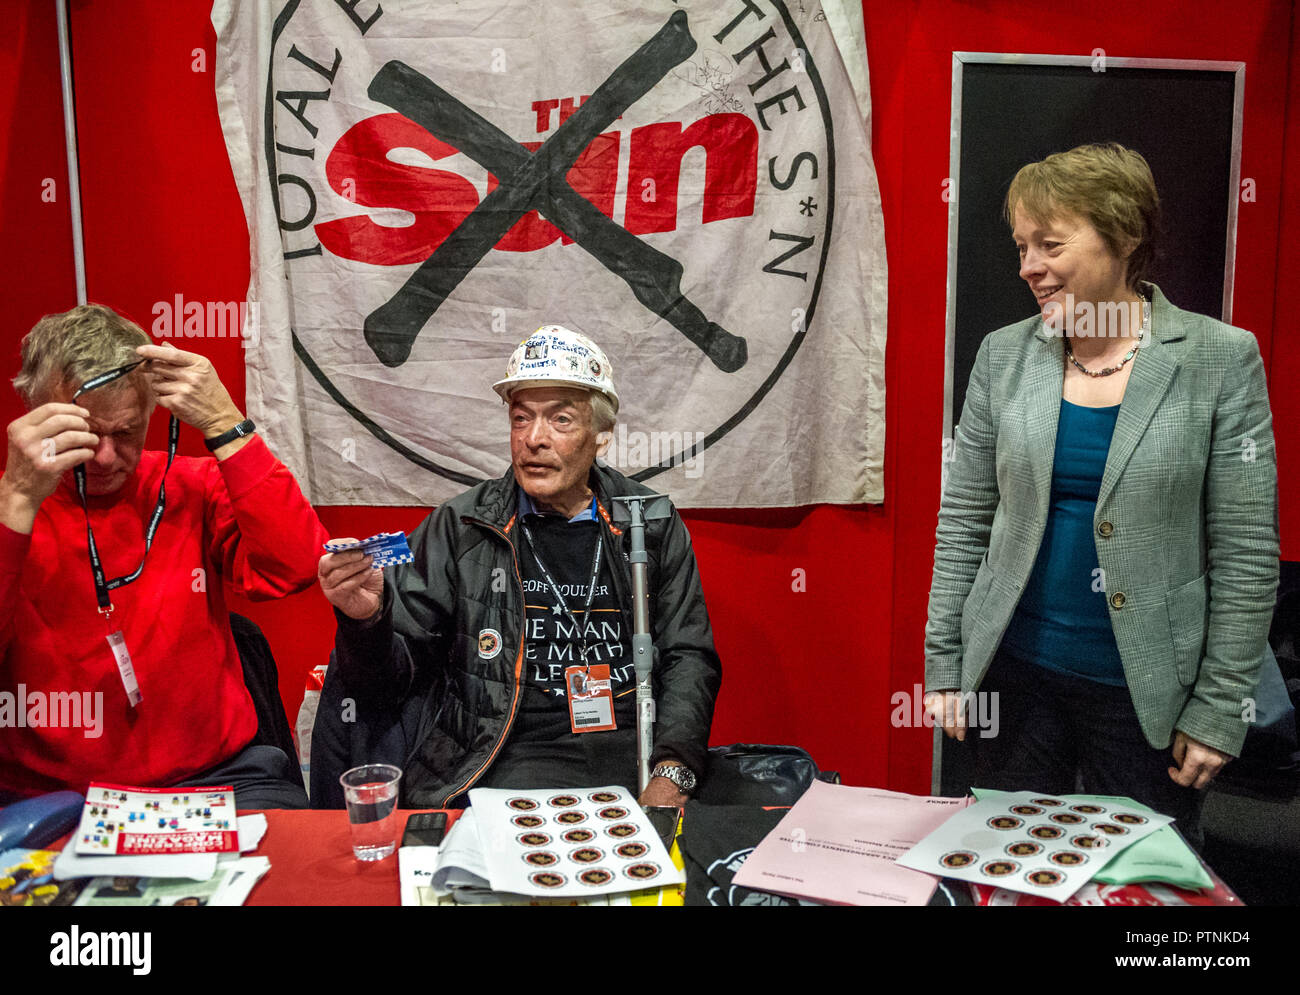 Geoff Poulter the exminer from Bolsover, Derbyshire at a political stall at the Labour Party annual conference 2018, Liverpool. Stock Photo